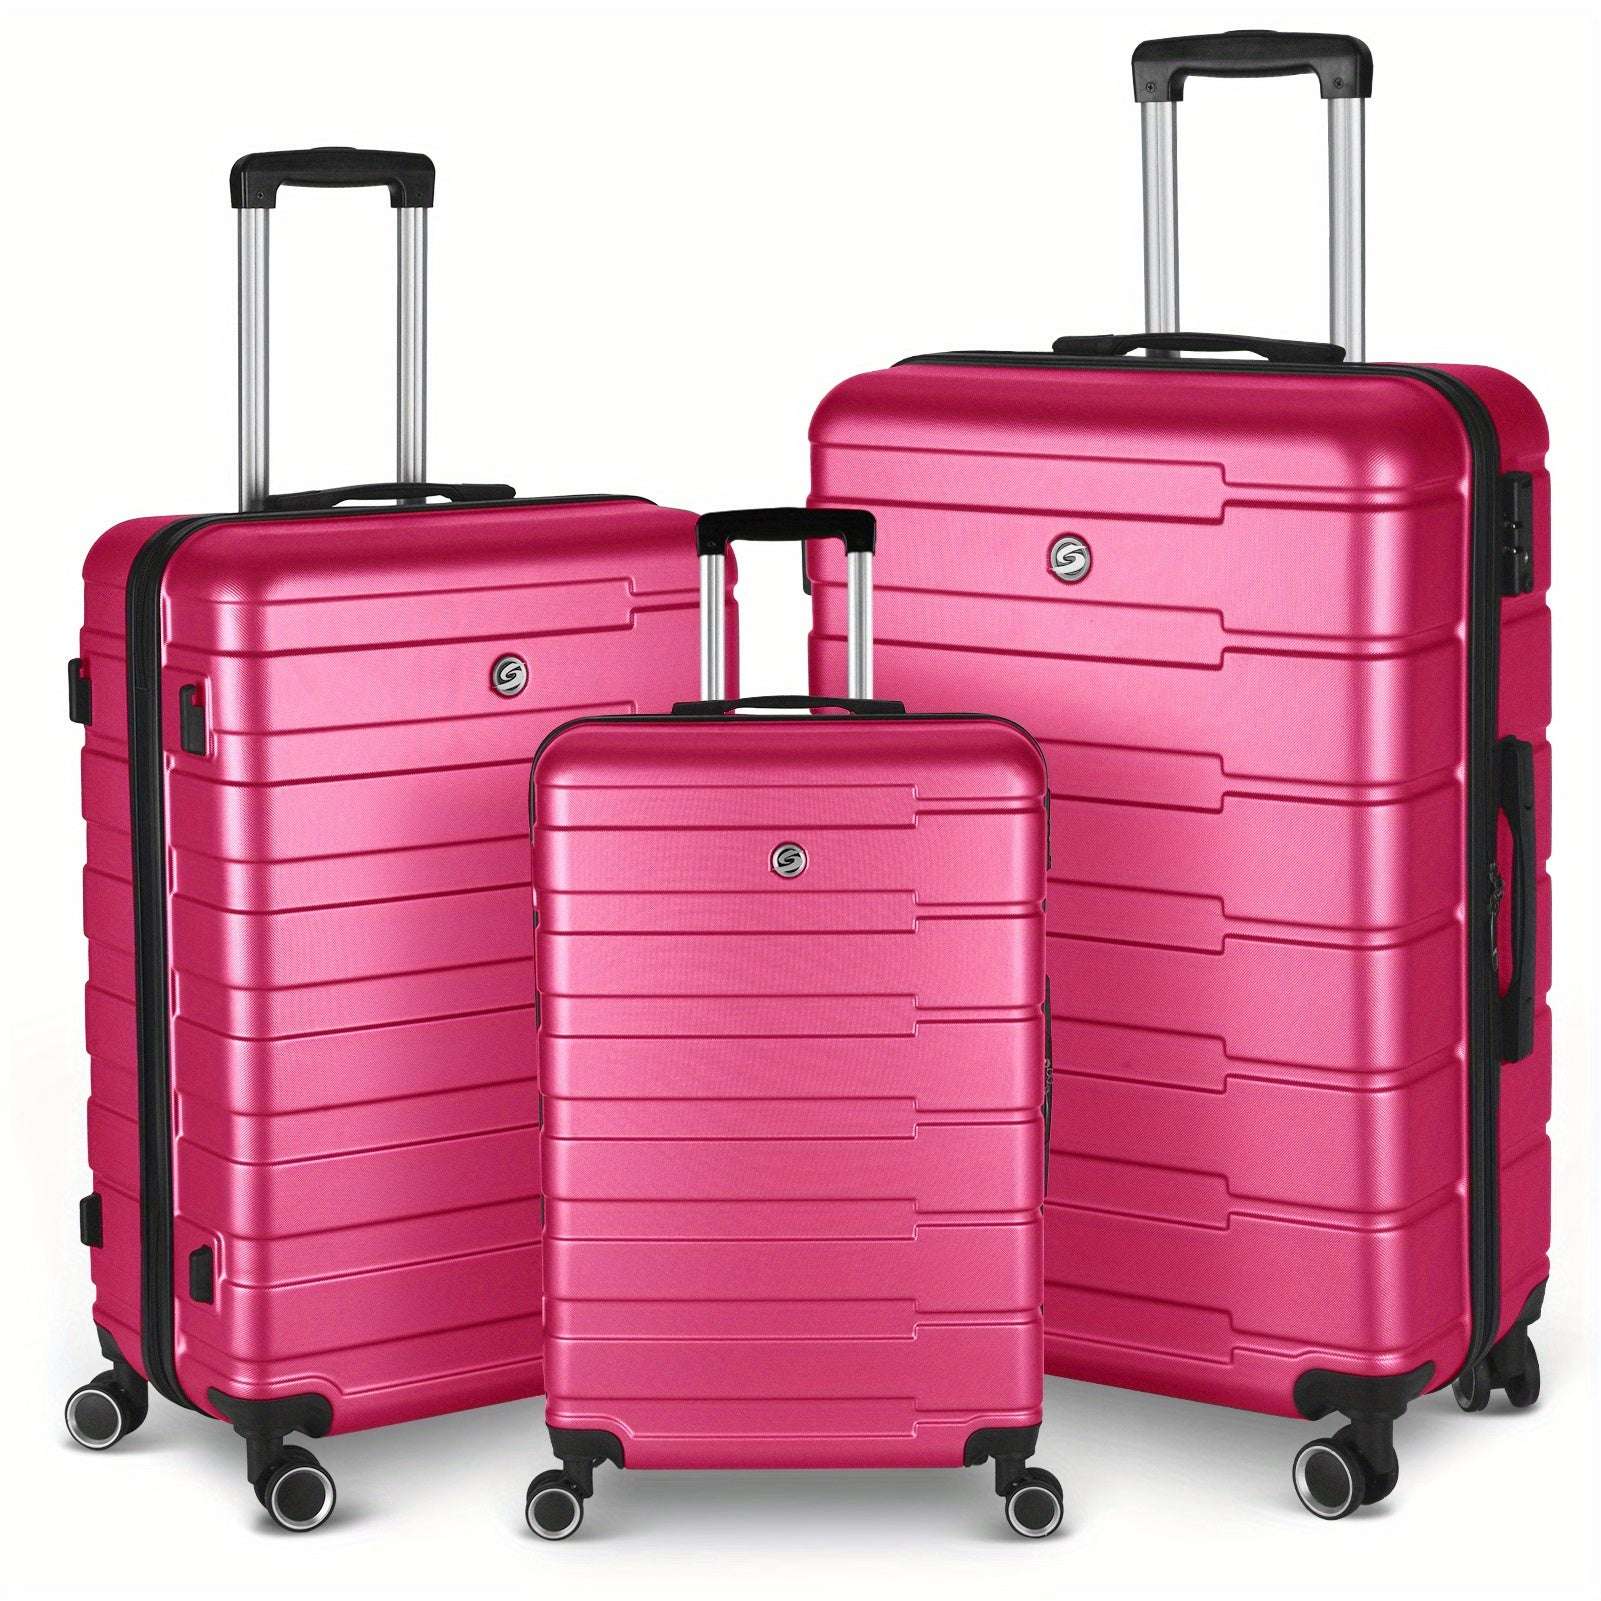 3-Piece Hardside Luggage Set, Fashionable Suitcases With Spinner Wheels, 20 24 28-inch Travel Trolley Cases 146 Luggage OK•PhotoFineArt OK•PhotoFineArt